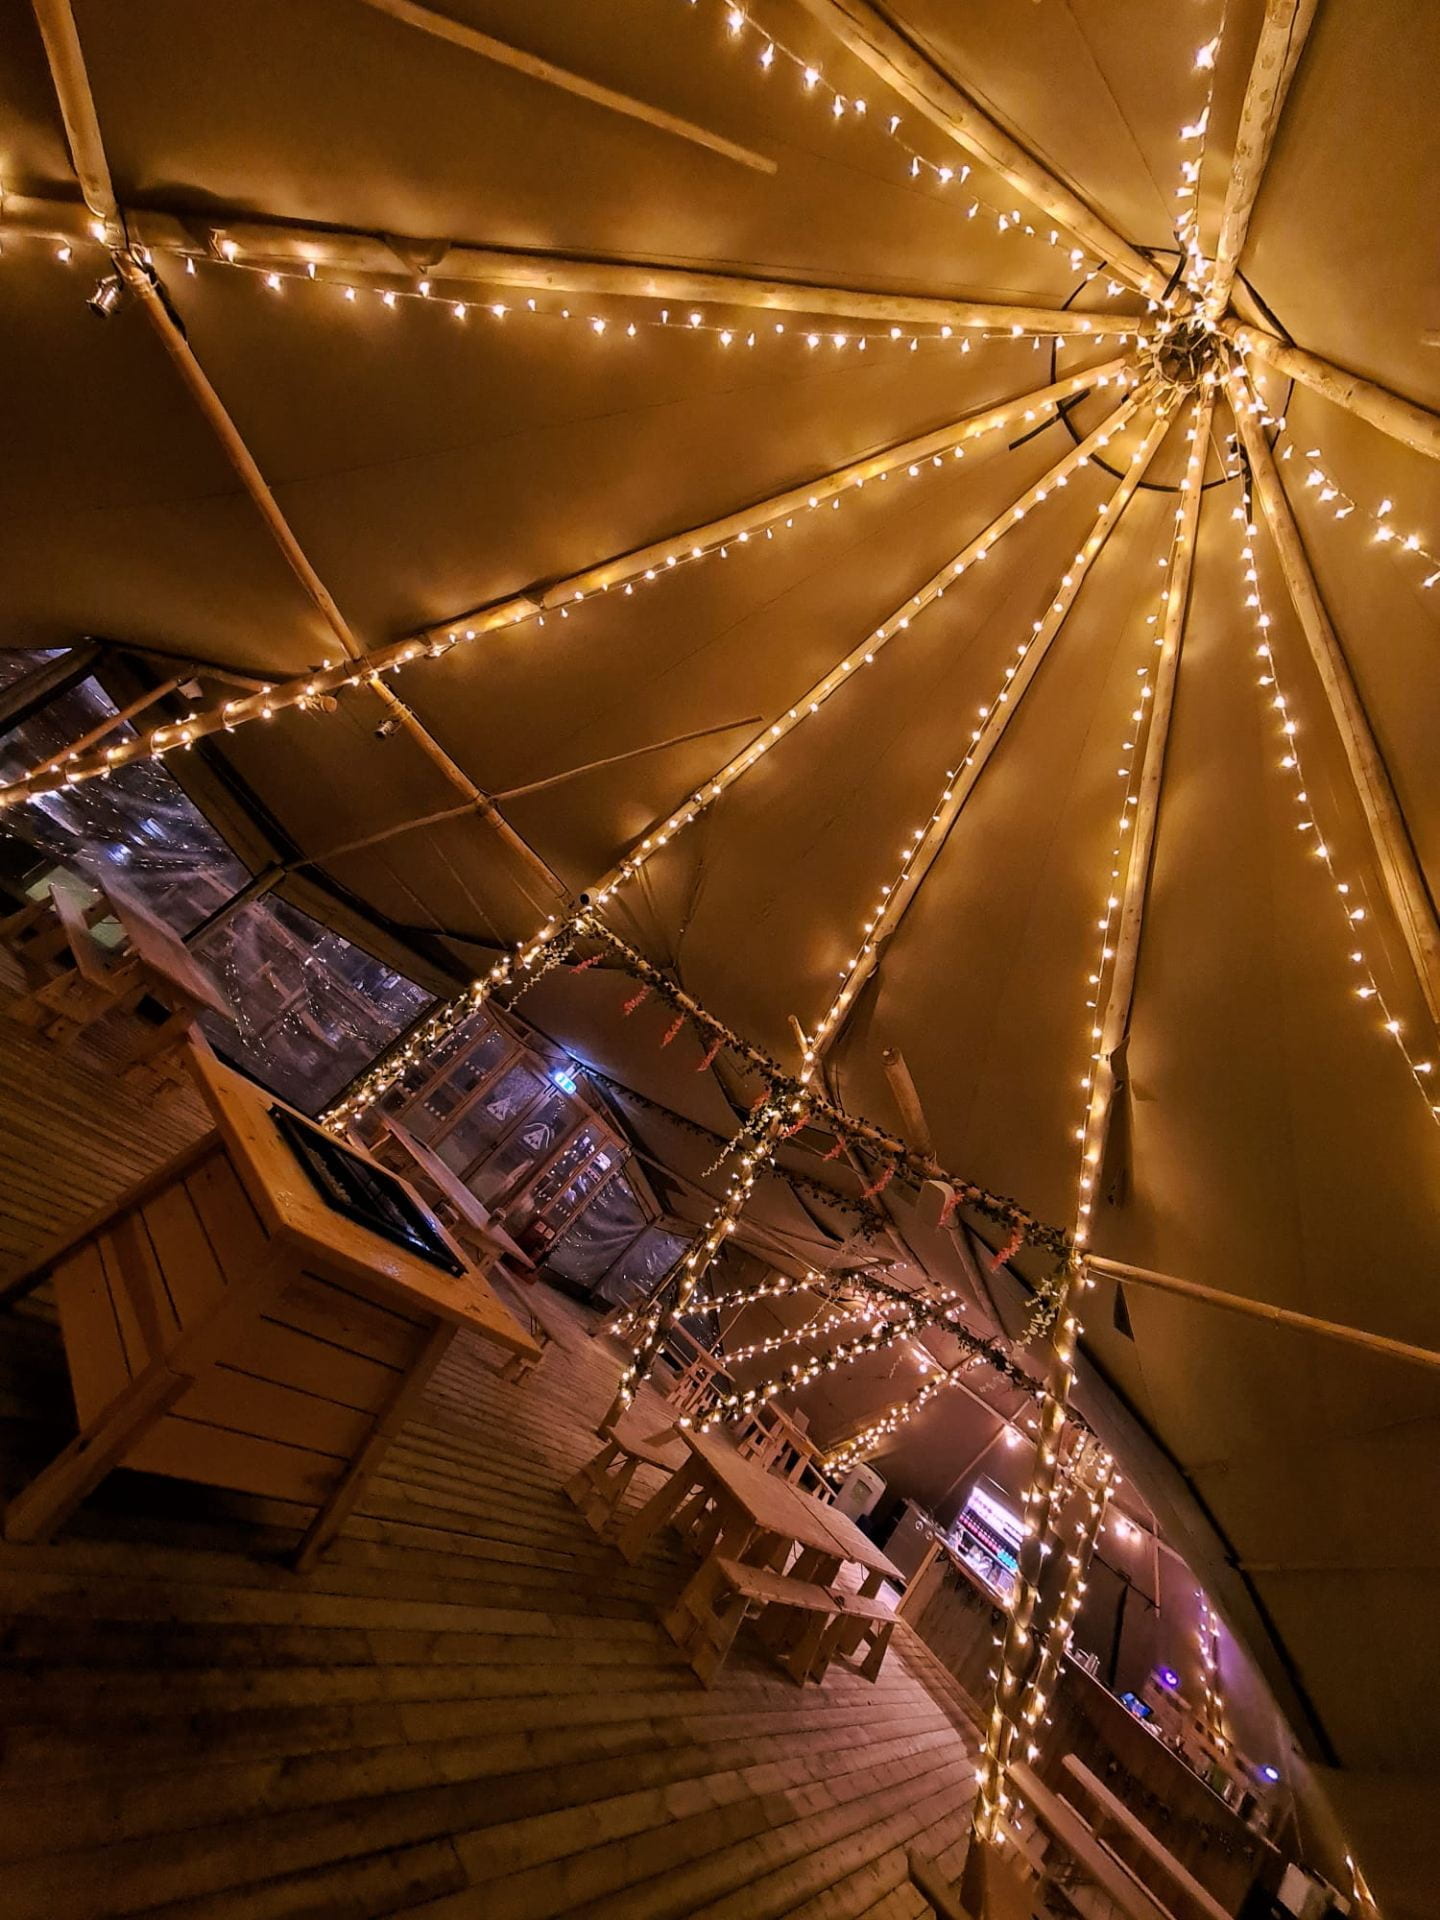 Inside view of tipi with beams with twinkly lights on